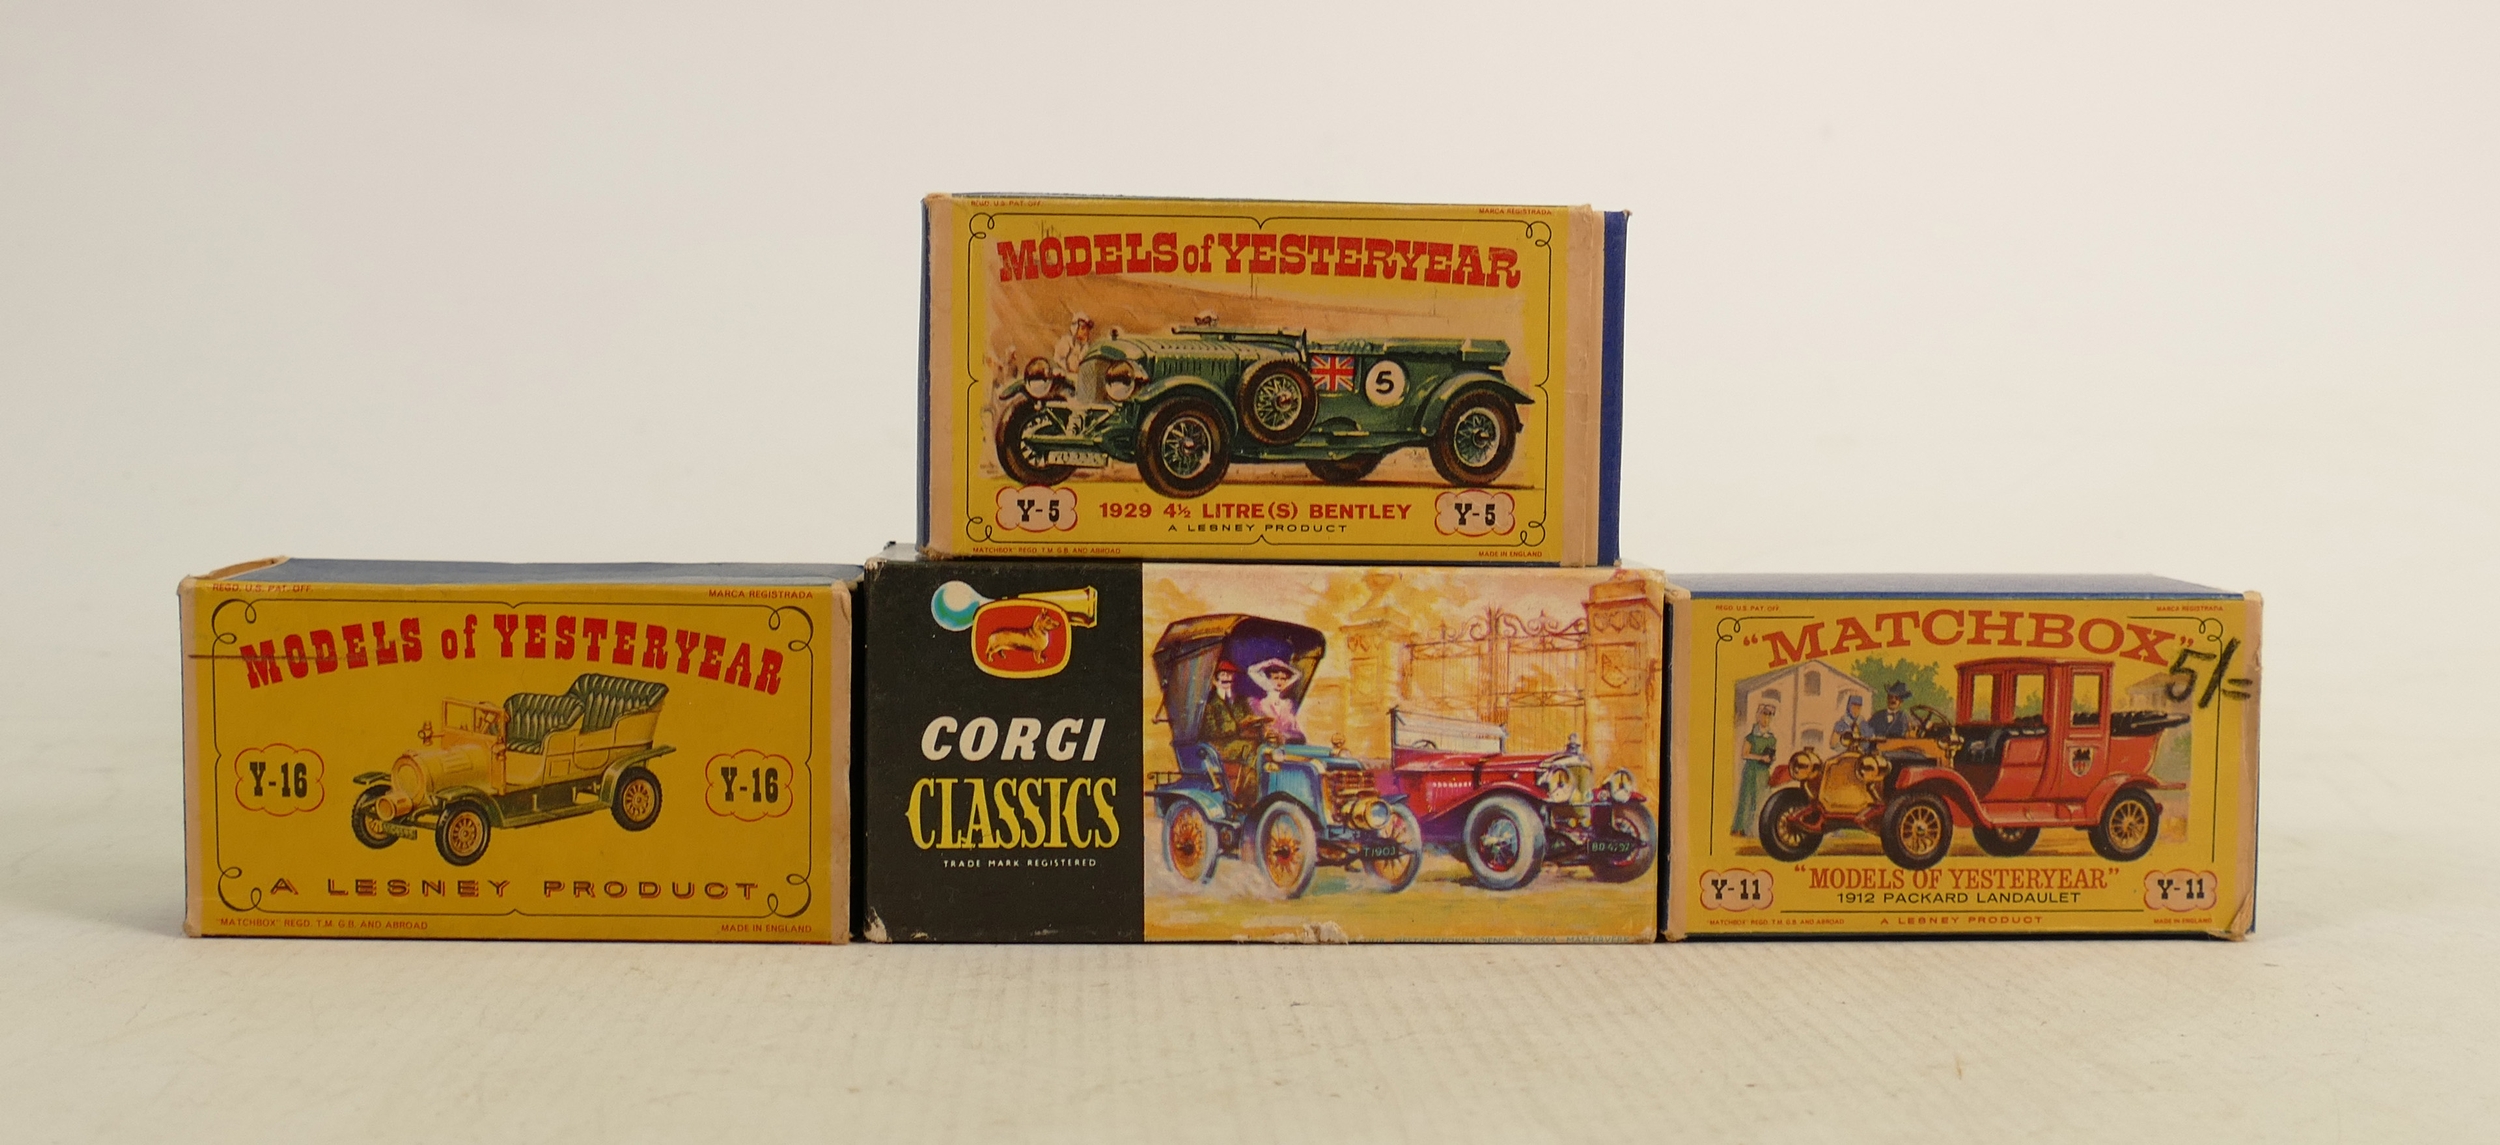 3 x Lesney models of Yesteryear & a Corgi Classics car all boxed: Cars all near mint to mint,